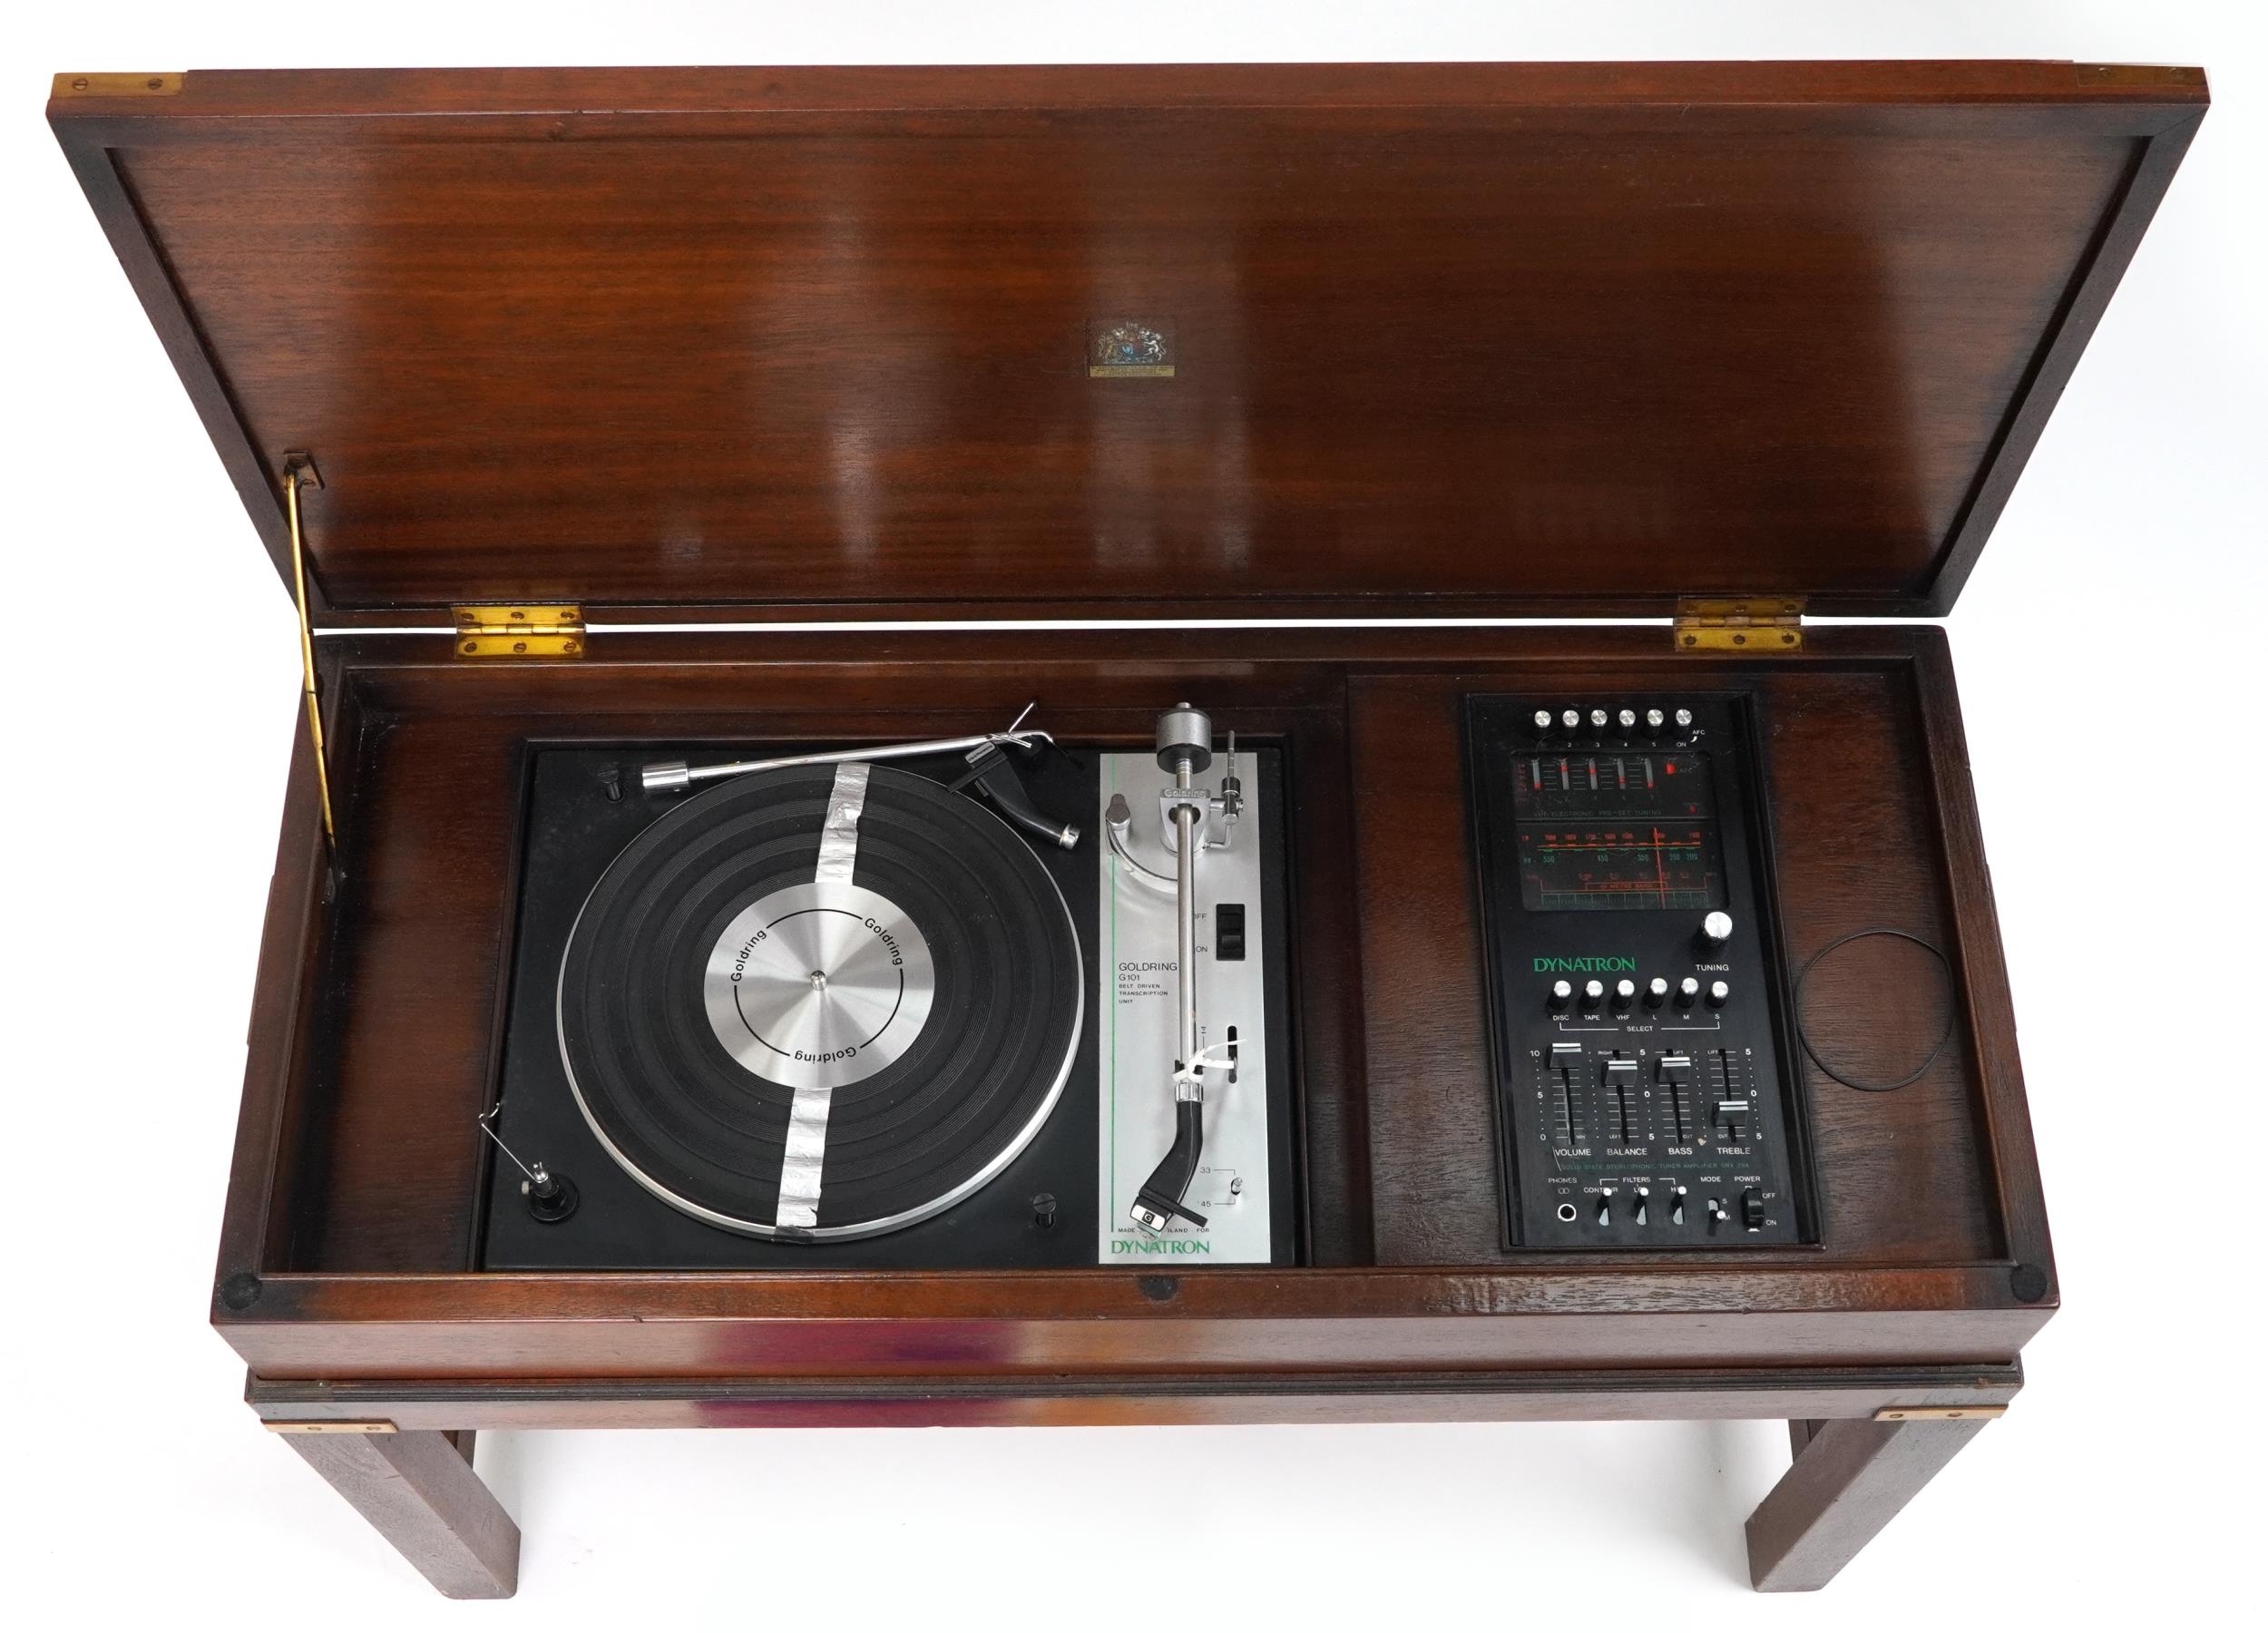 Vintage Dynatron Goldring G101 turntable with control panel housed in a military interest campaign - Image 3 of 6